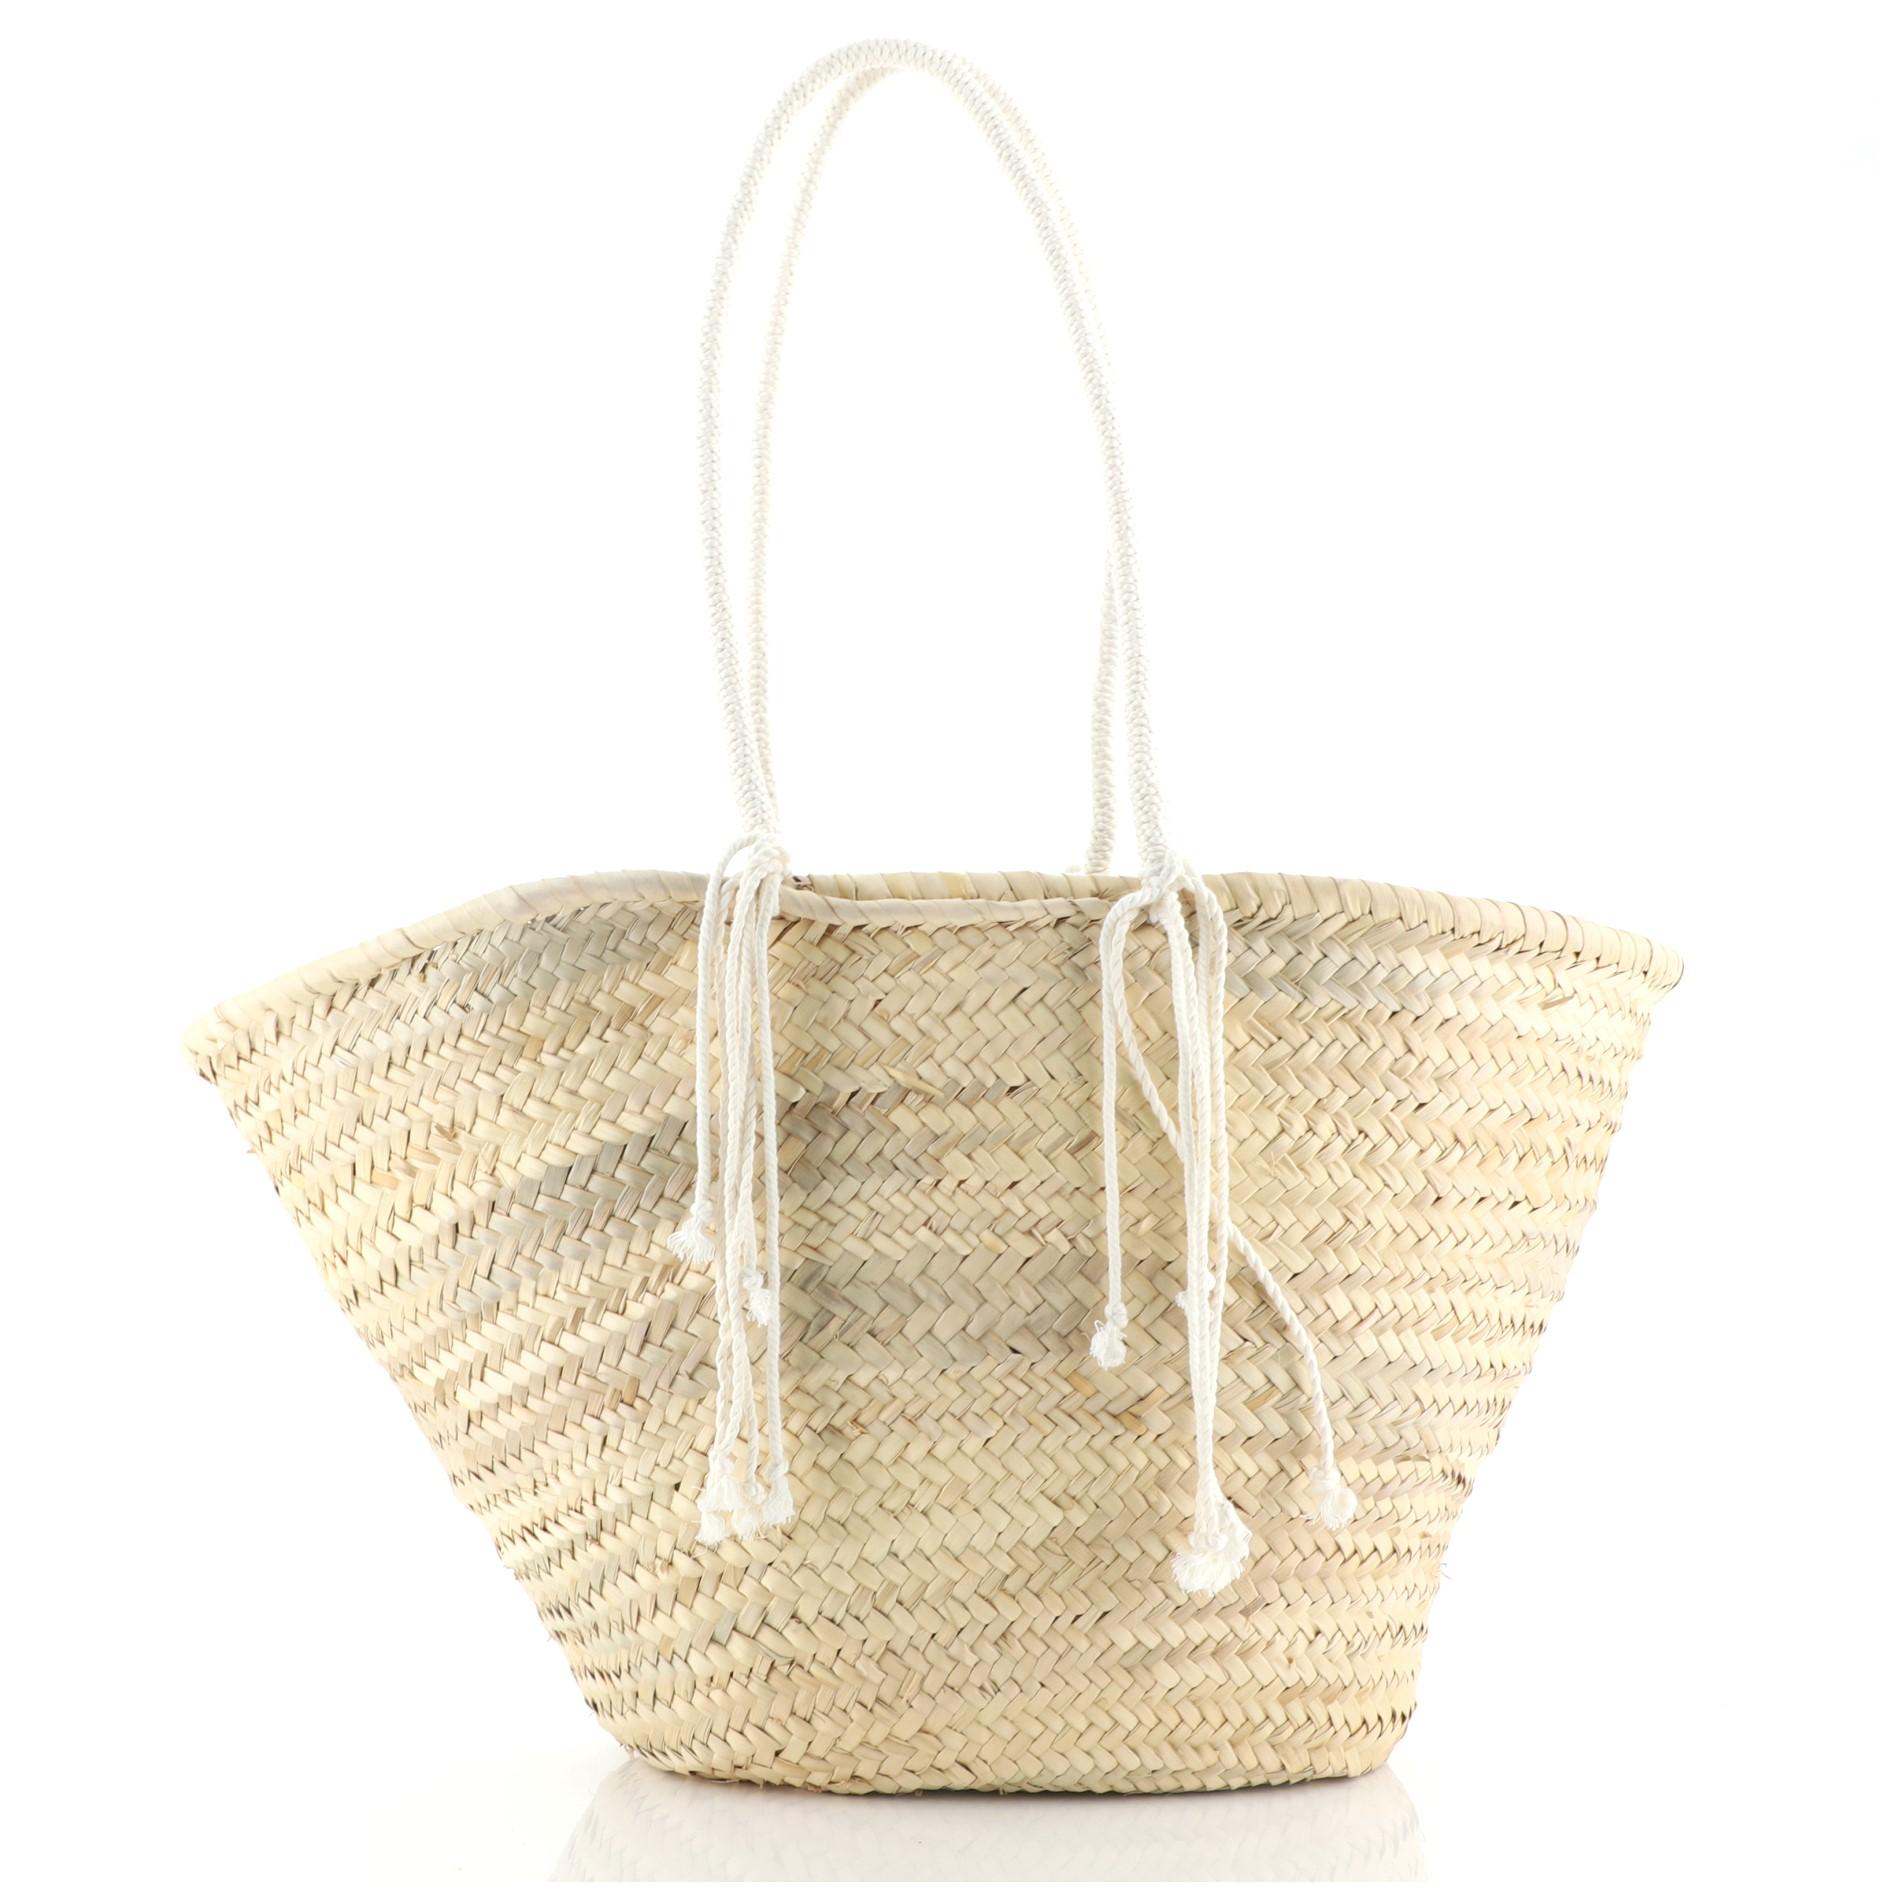 Celine Classic Panier Bucket Bag Limited Edition Embroidered Woven Straw Large
Neutral

Condition Details: Minor darkening and wear on exterior.

50094MSC

Height 13